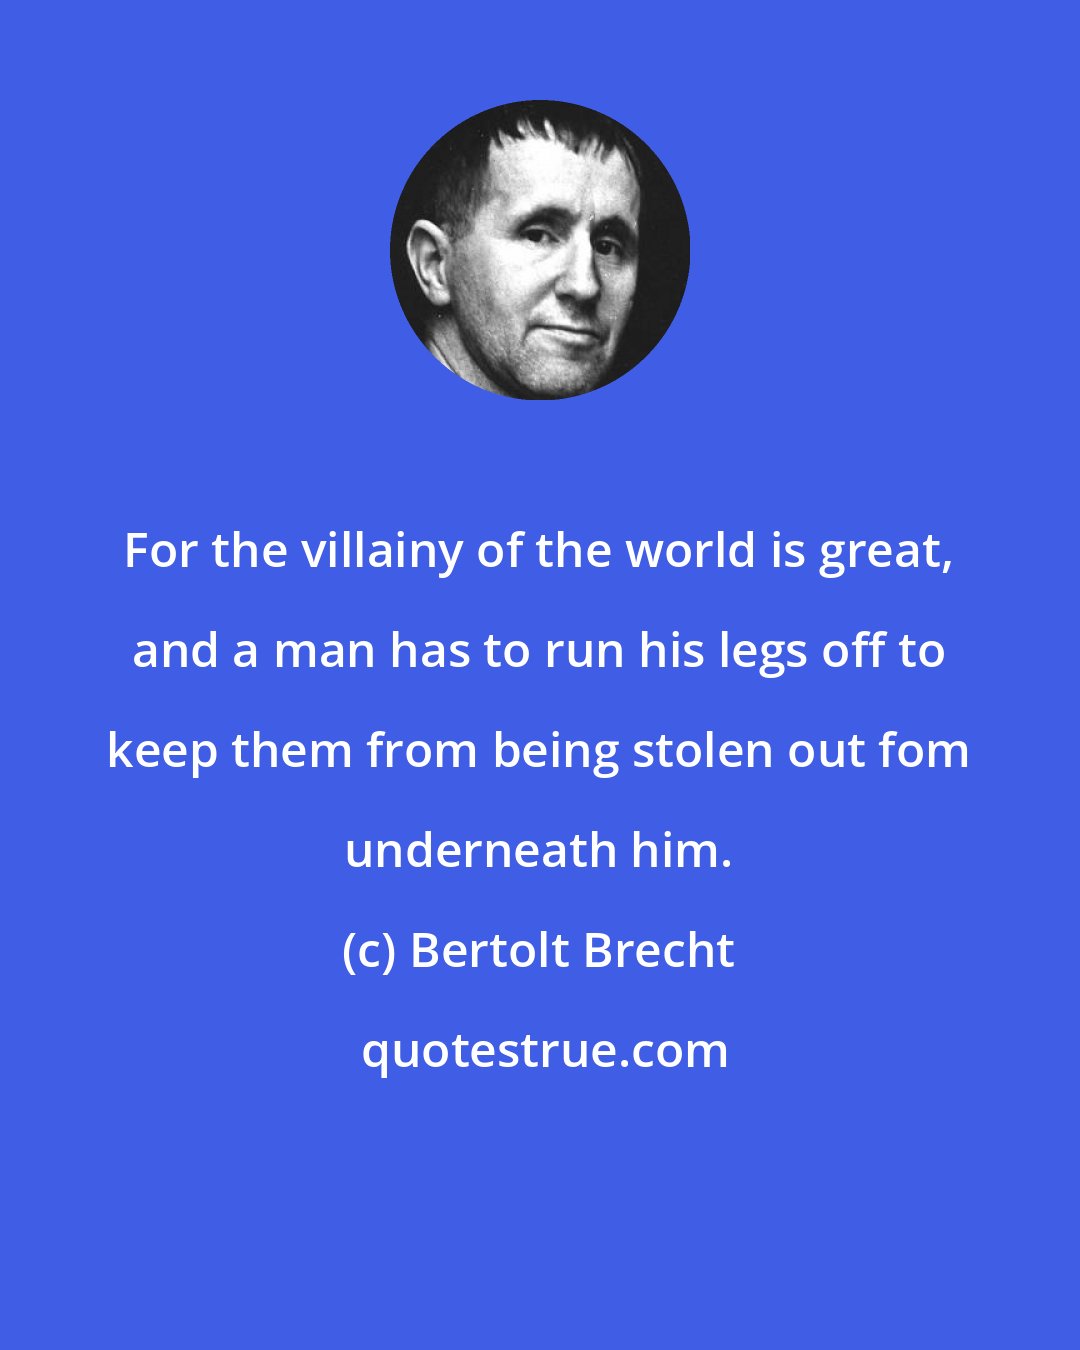 Bertolt Brecht: For the villainy of the world is great, and a man has to run his legs off to keep them from being stolen out fom underneath him.